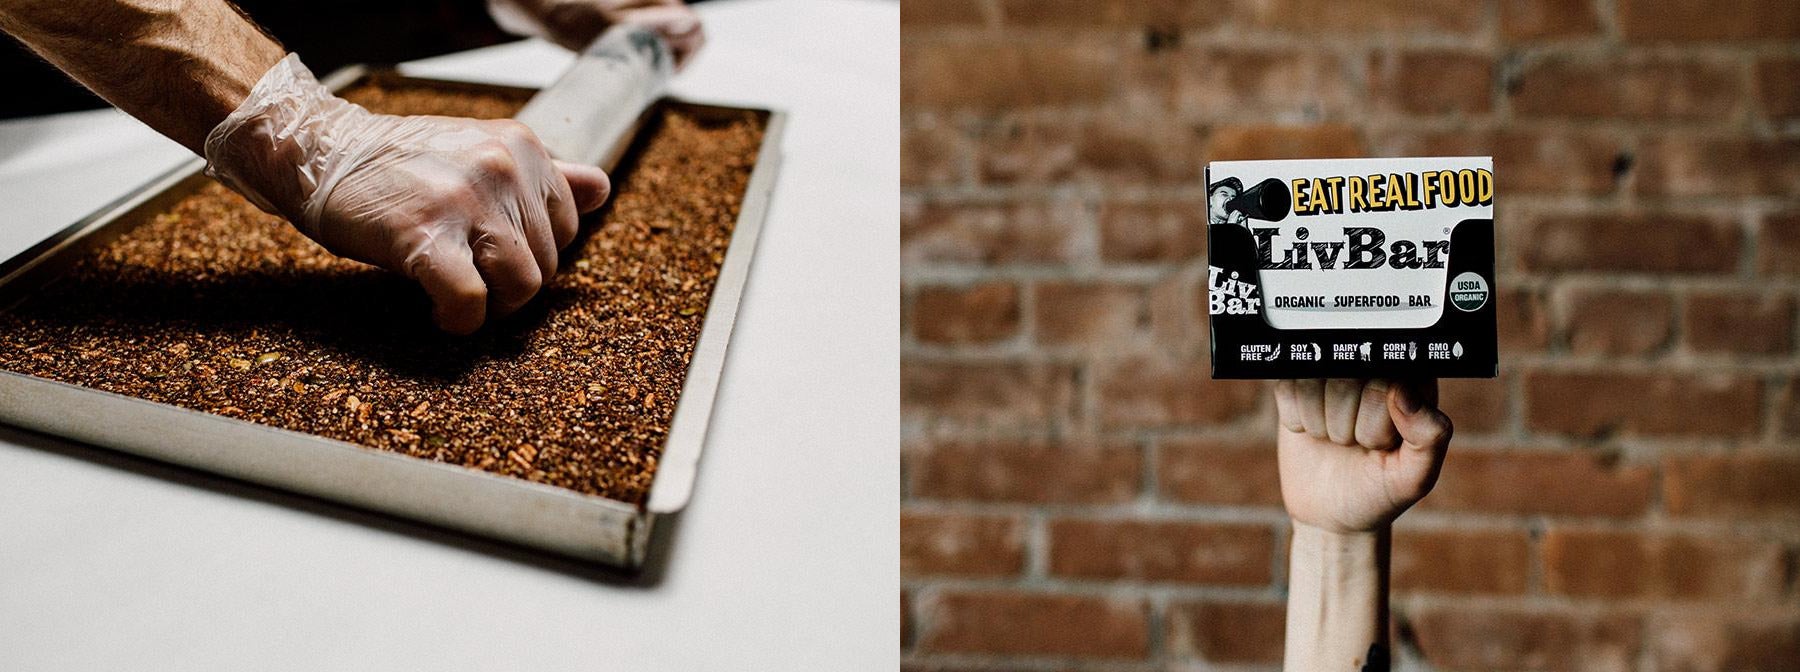 (left) person out of frame rolling out granola bars with a rolling pin (right) pack of livbars rest on top of extended fist in front of brick building